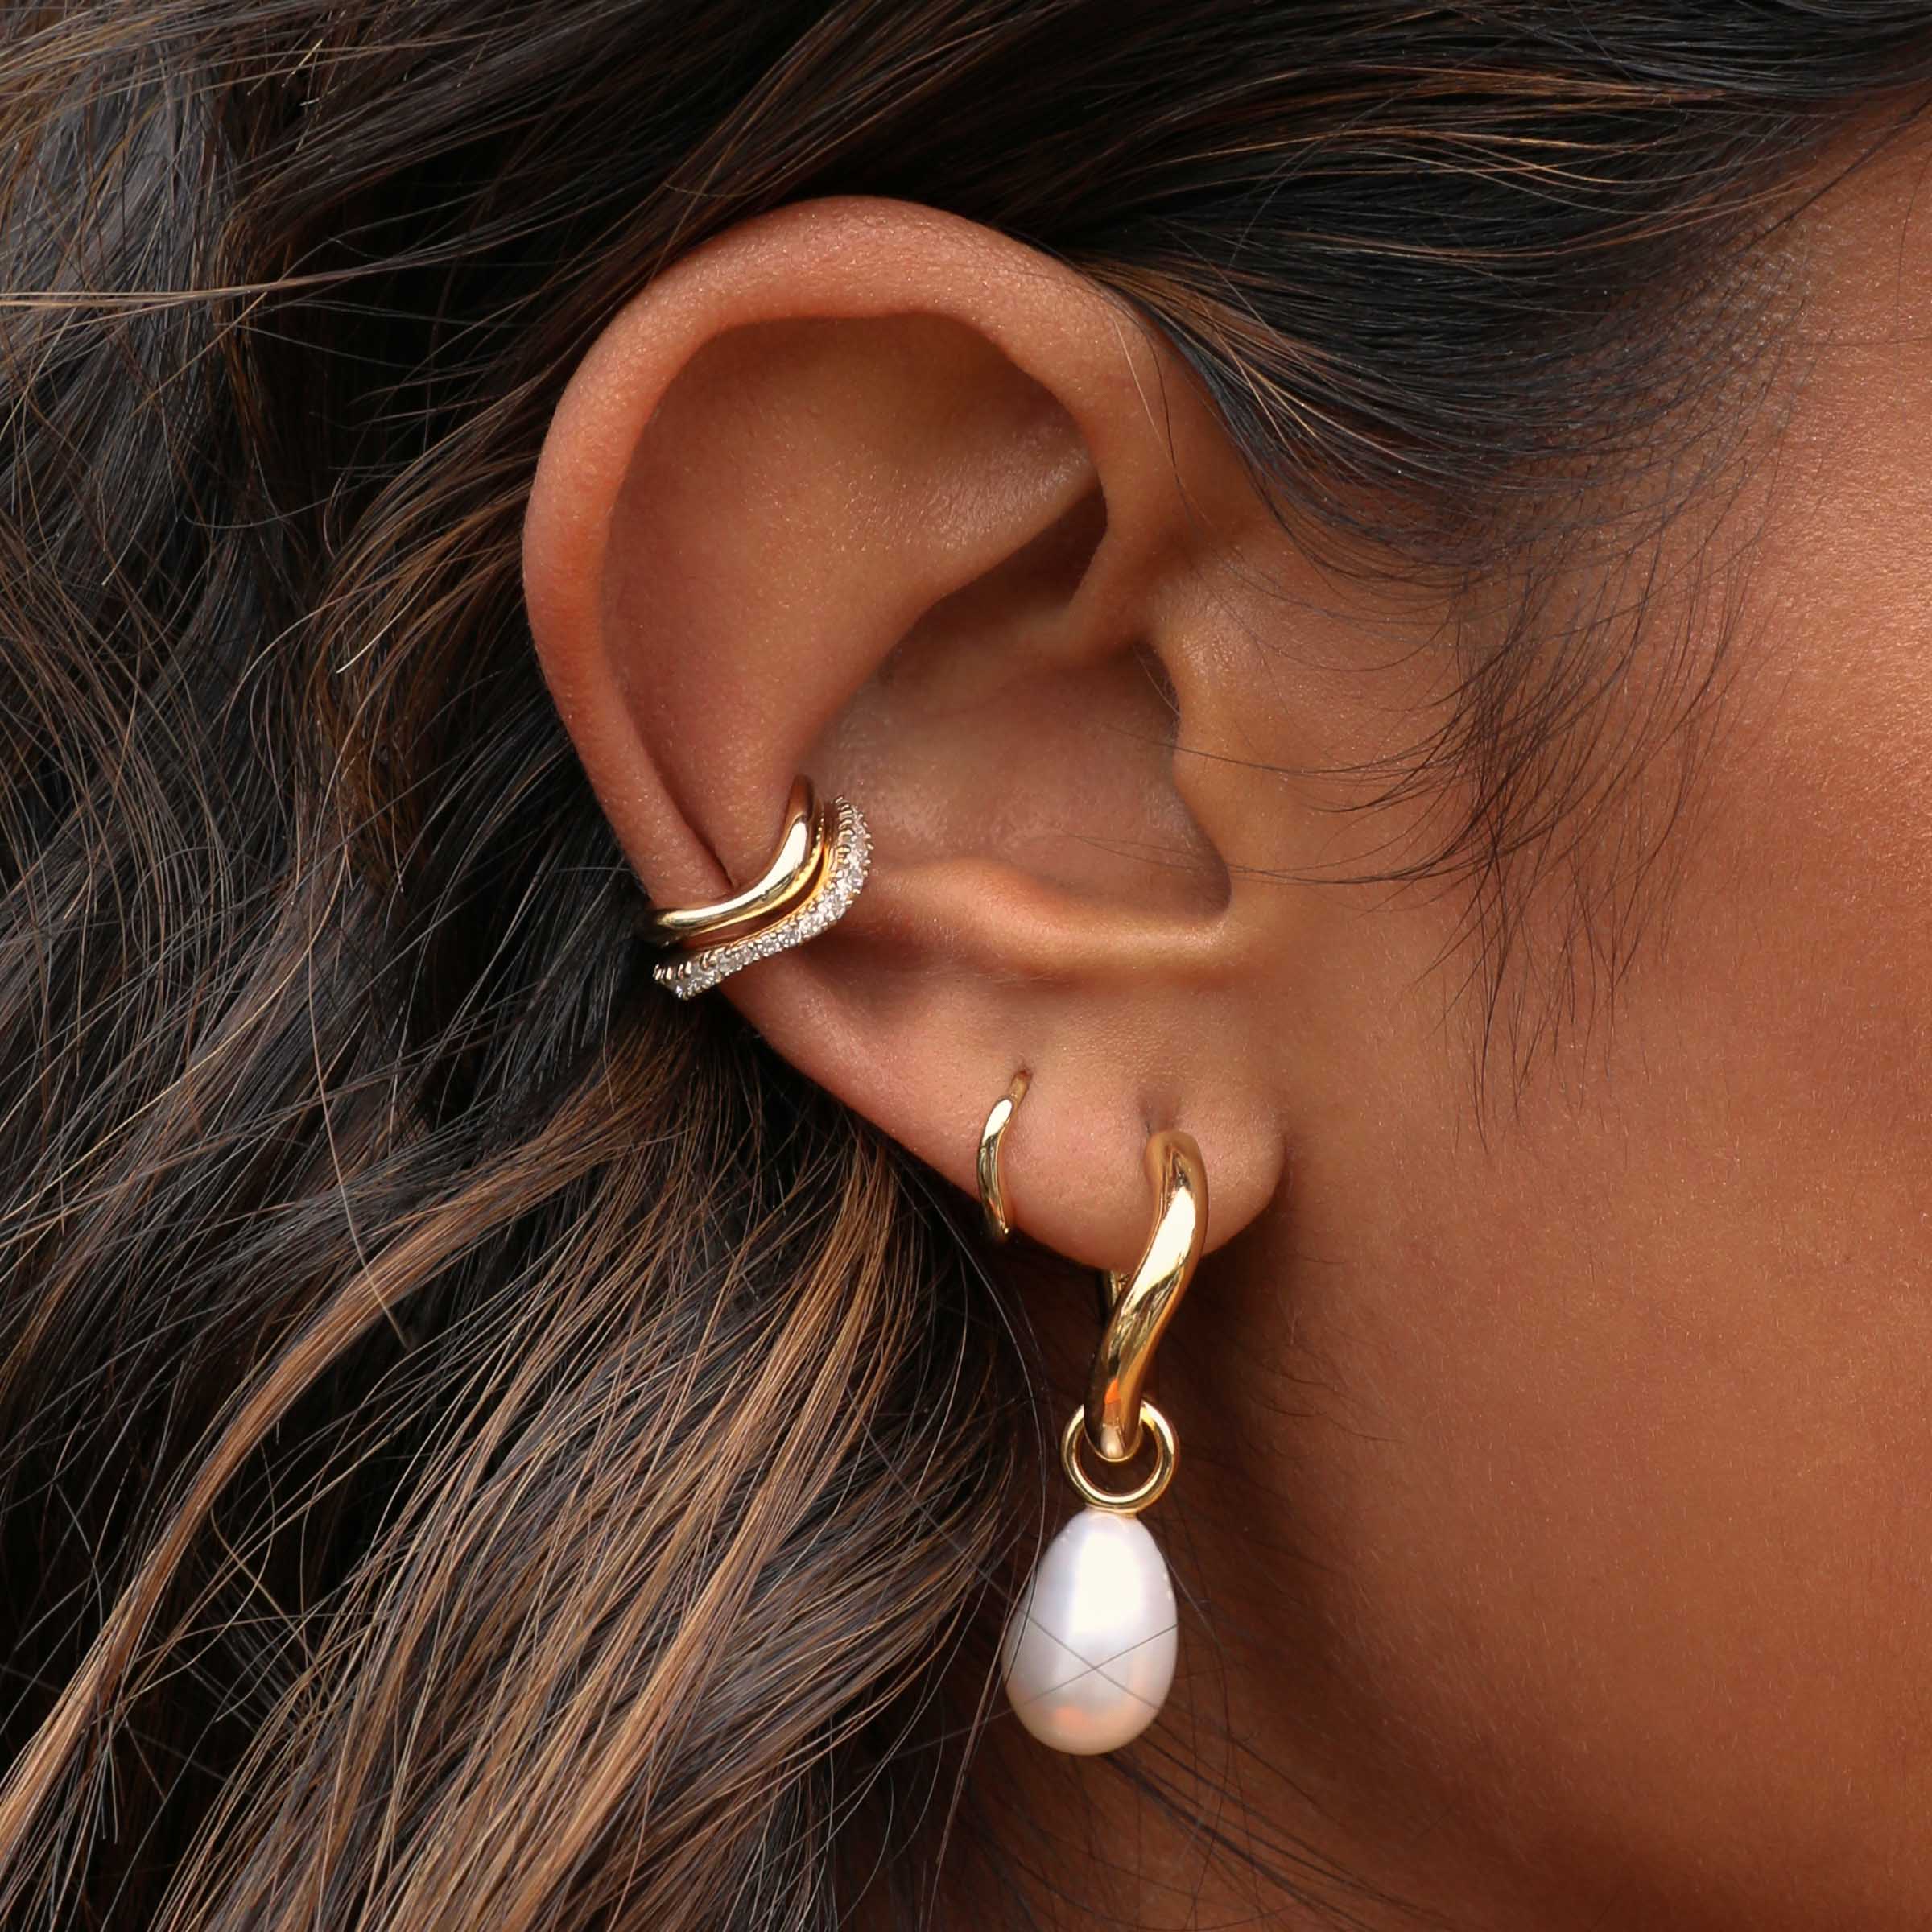 Wave Huggies in Gold worn with Serenity Pearl Hoop Earrings and wave ear cuffs